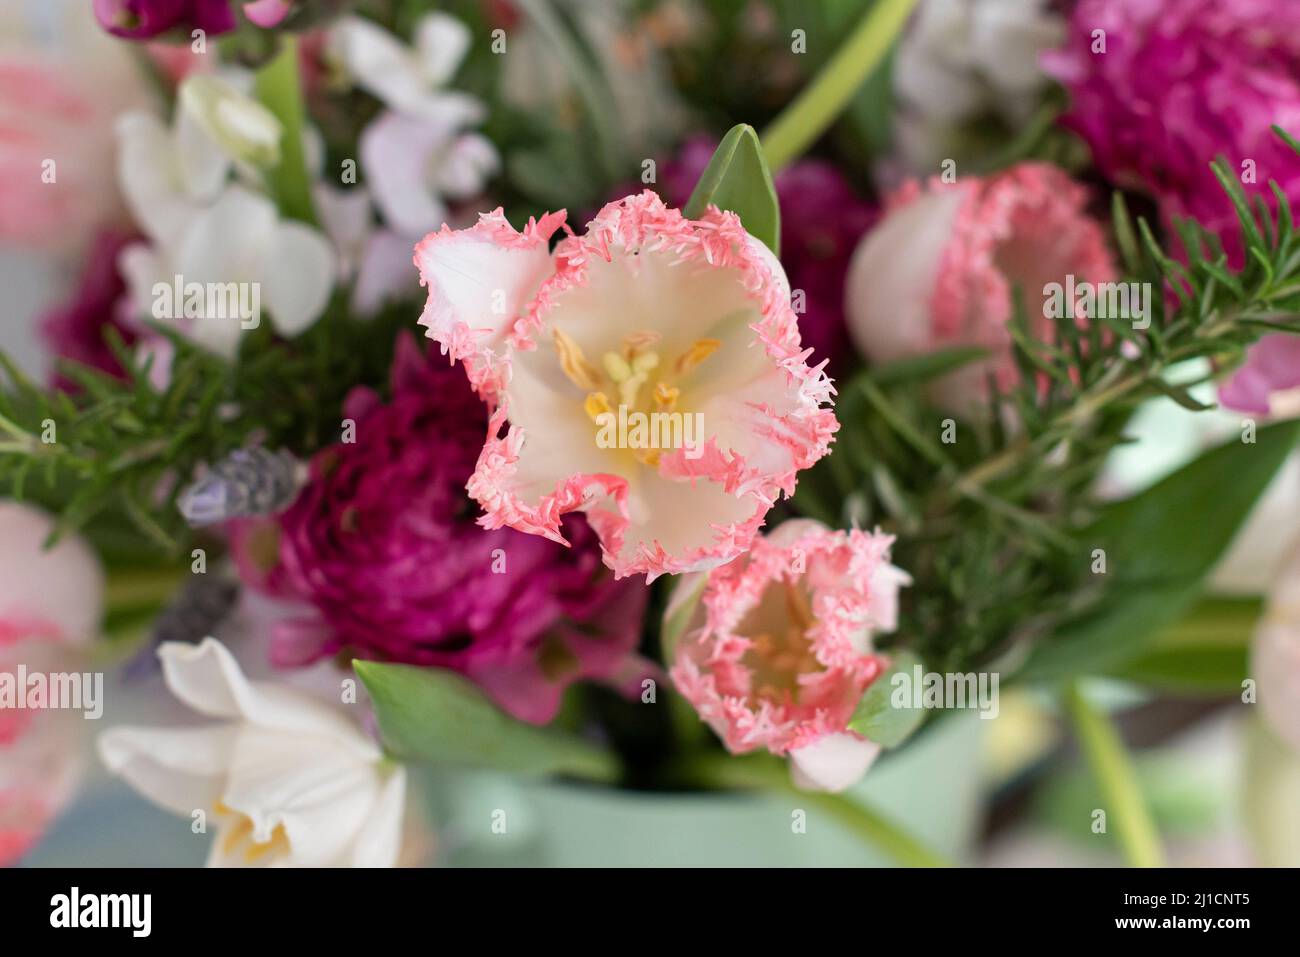 Brightly colored tulips from a flower market. Stock Photo